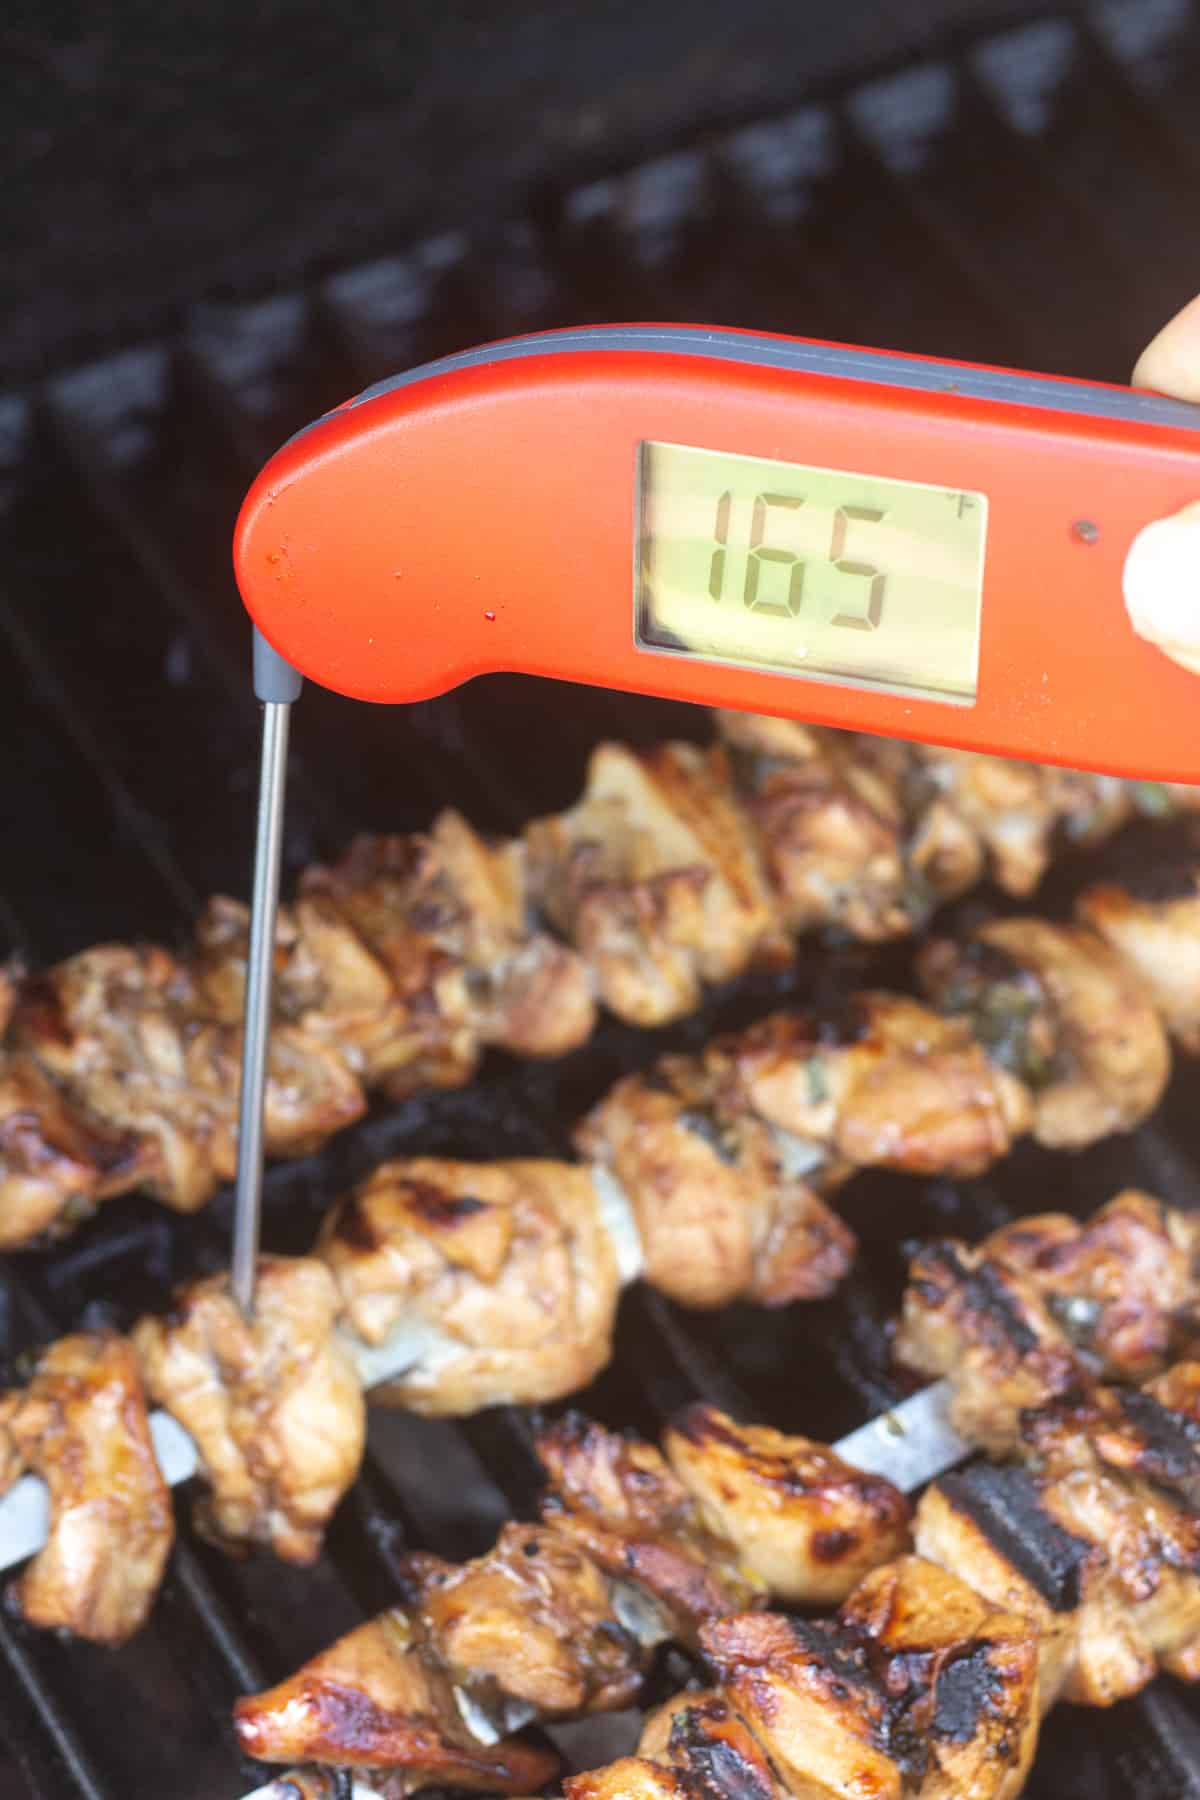 A hand measuring the internal temp of chicken kabobs on the grill.